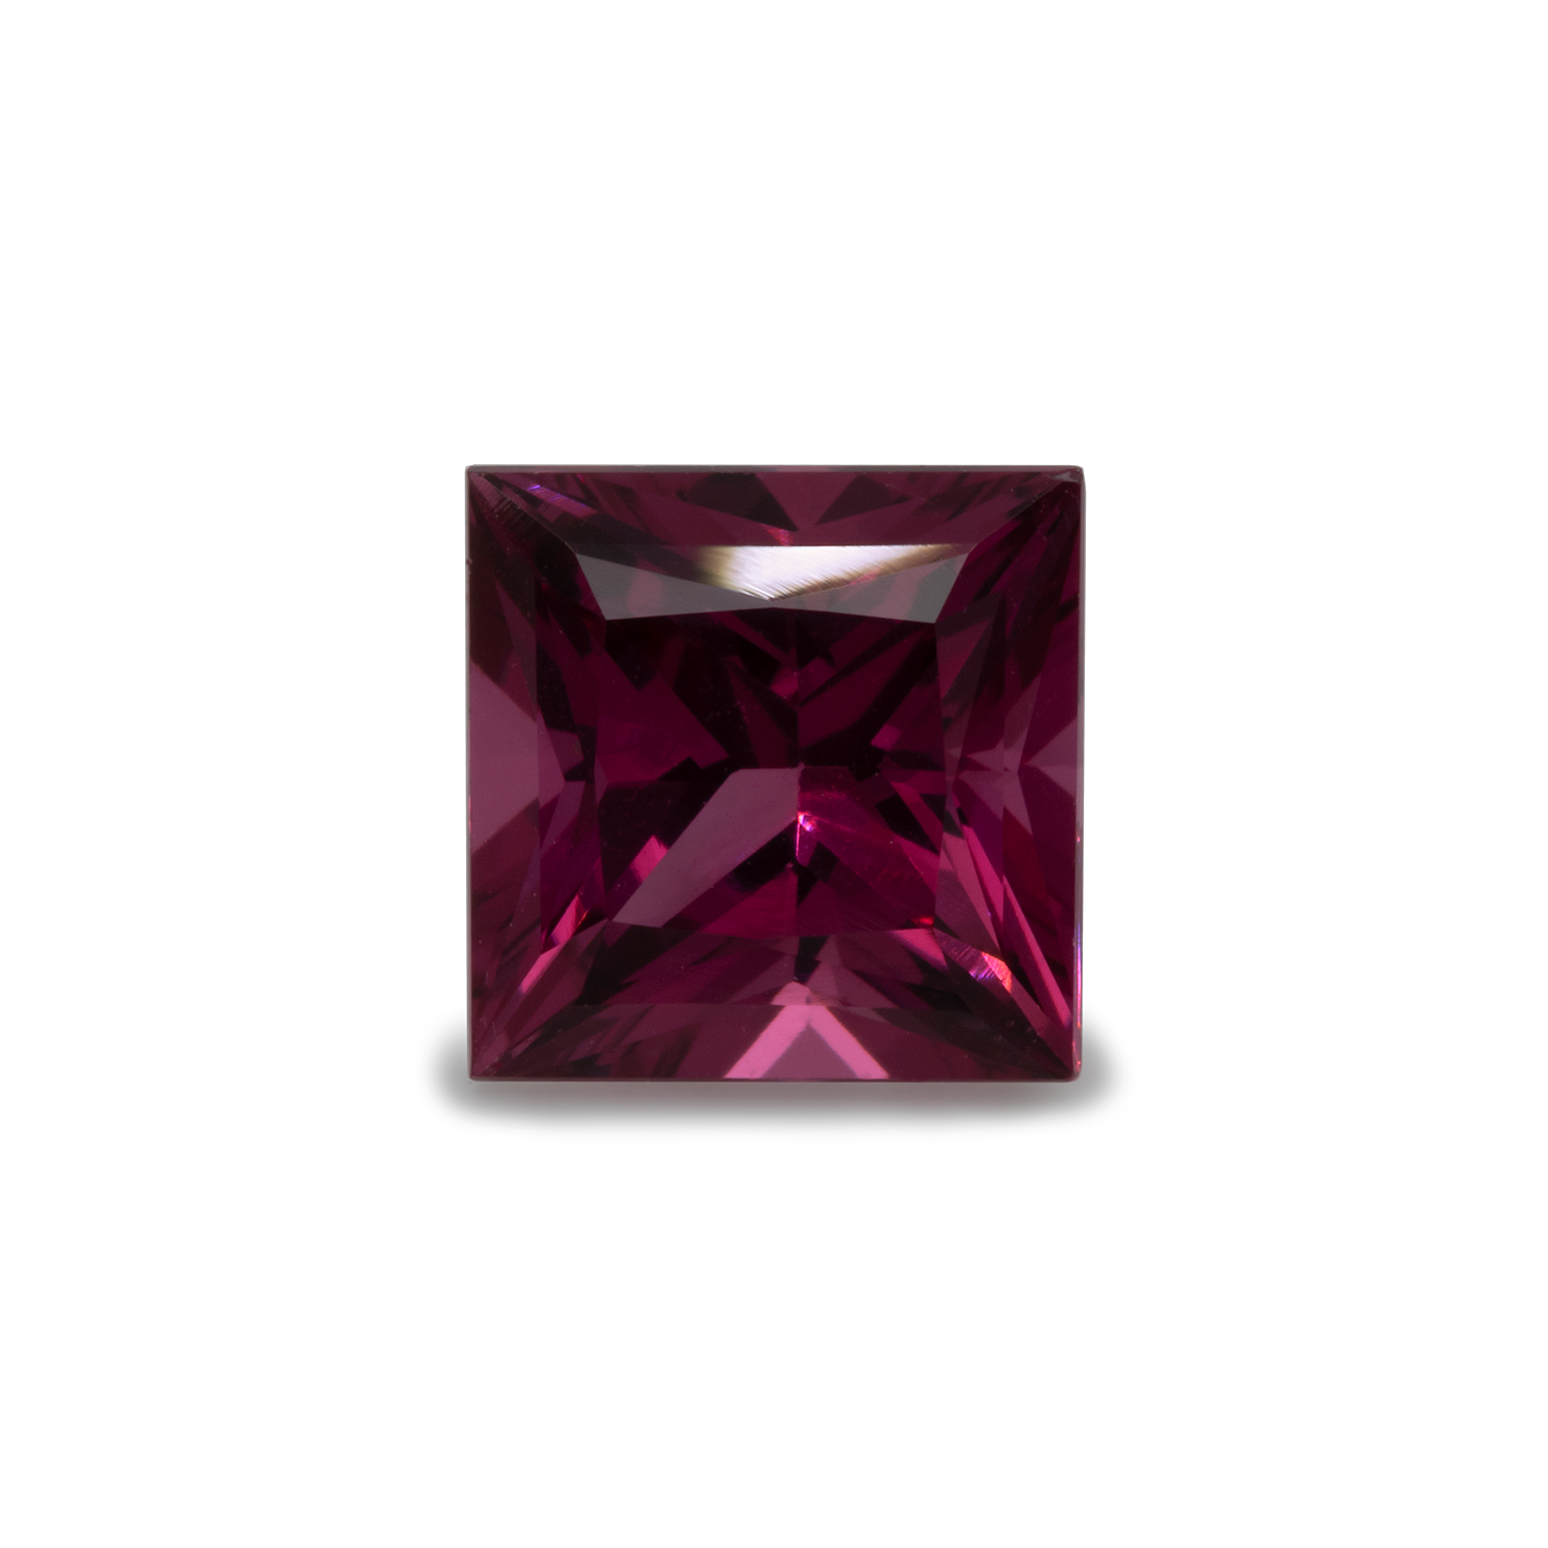 Rhodolite - red/purple, square, 6x6 mm, 1.30 cts, No. RD15001